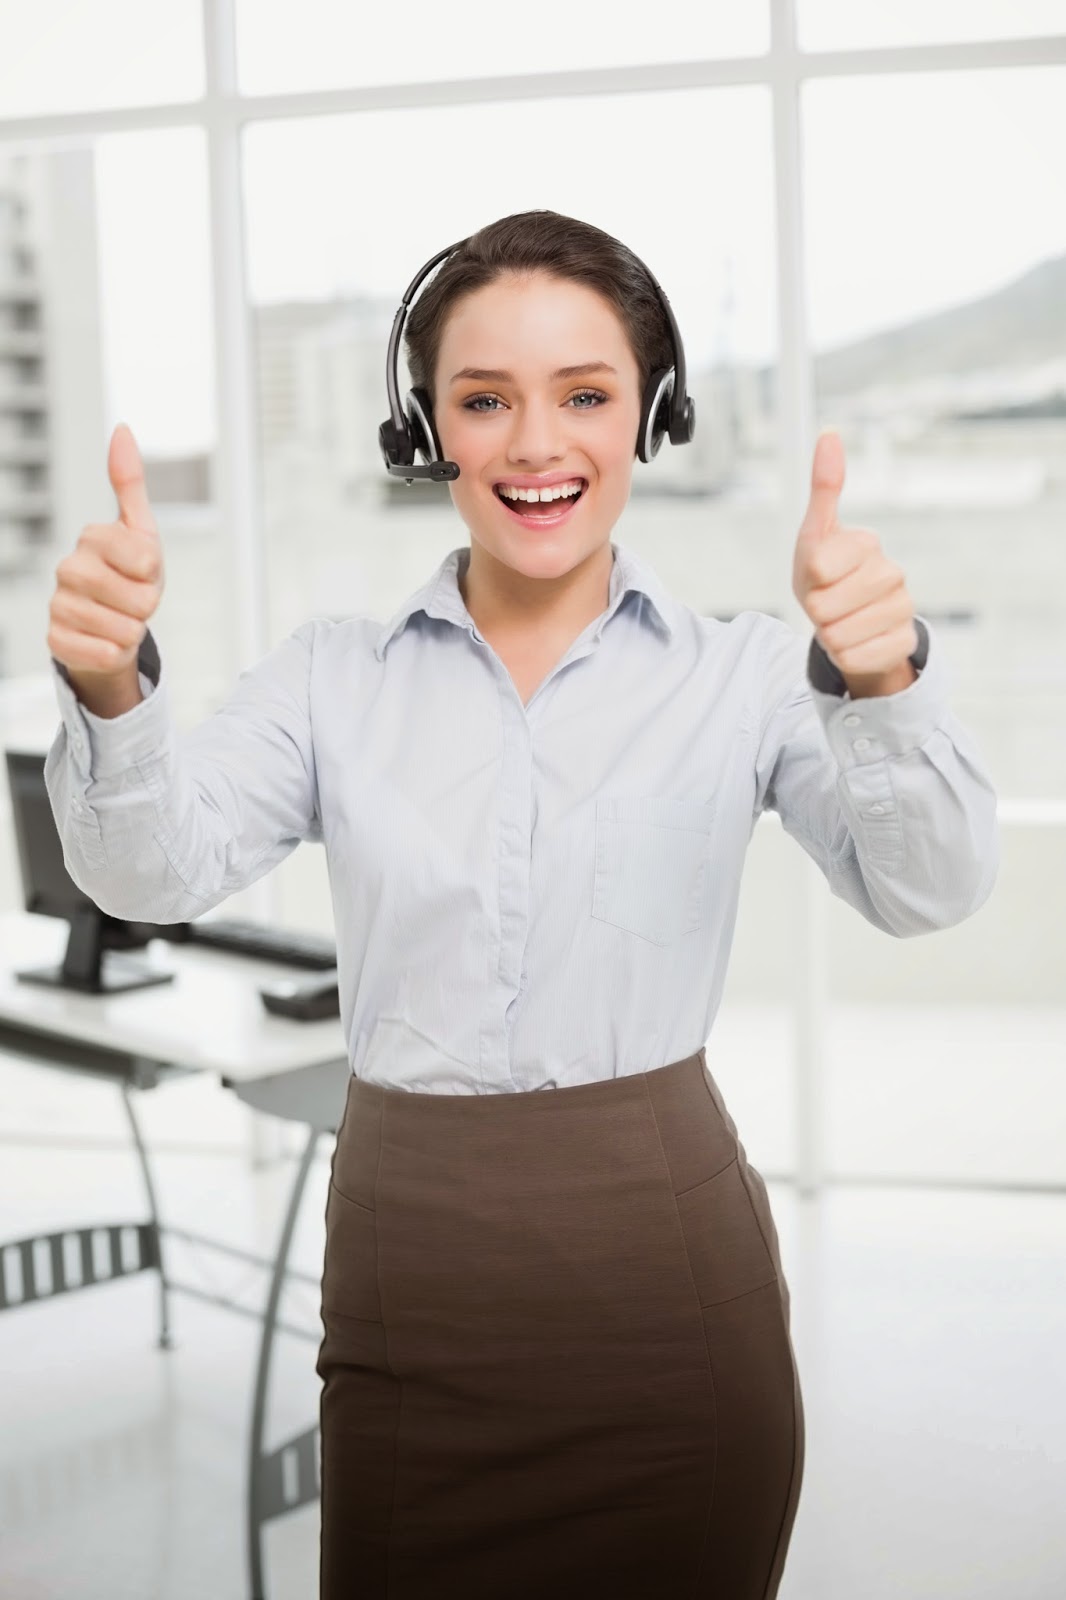 Millennial woman wearing headset and giving thumbs up